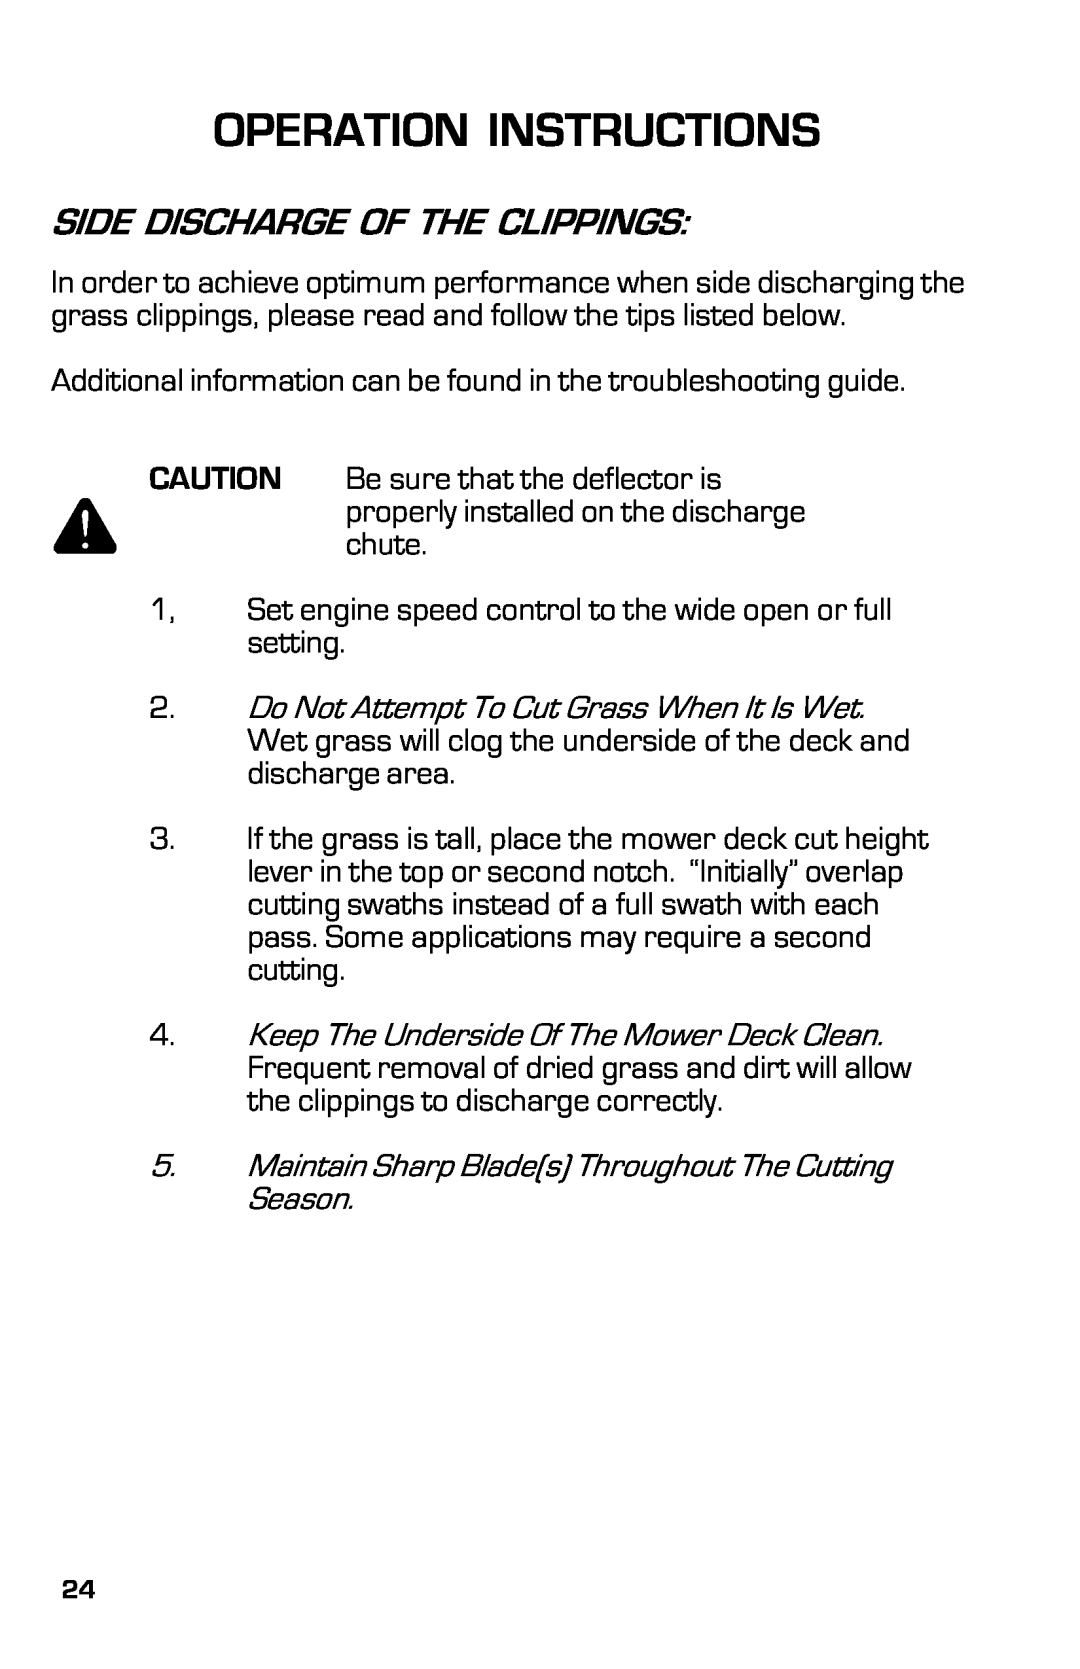 Dixon ZTR 3363, 13631-0702 manual Operation Instructions, Side Discharge Of The Clippings 